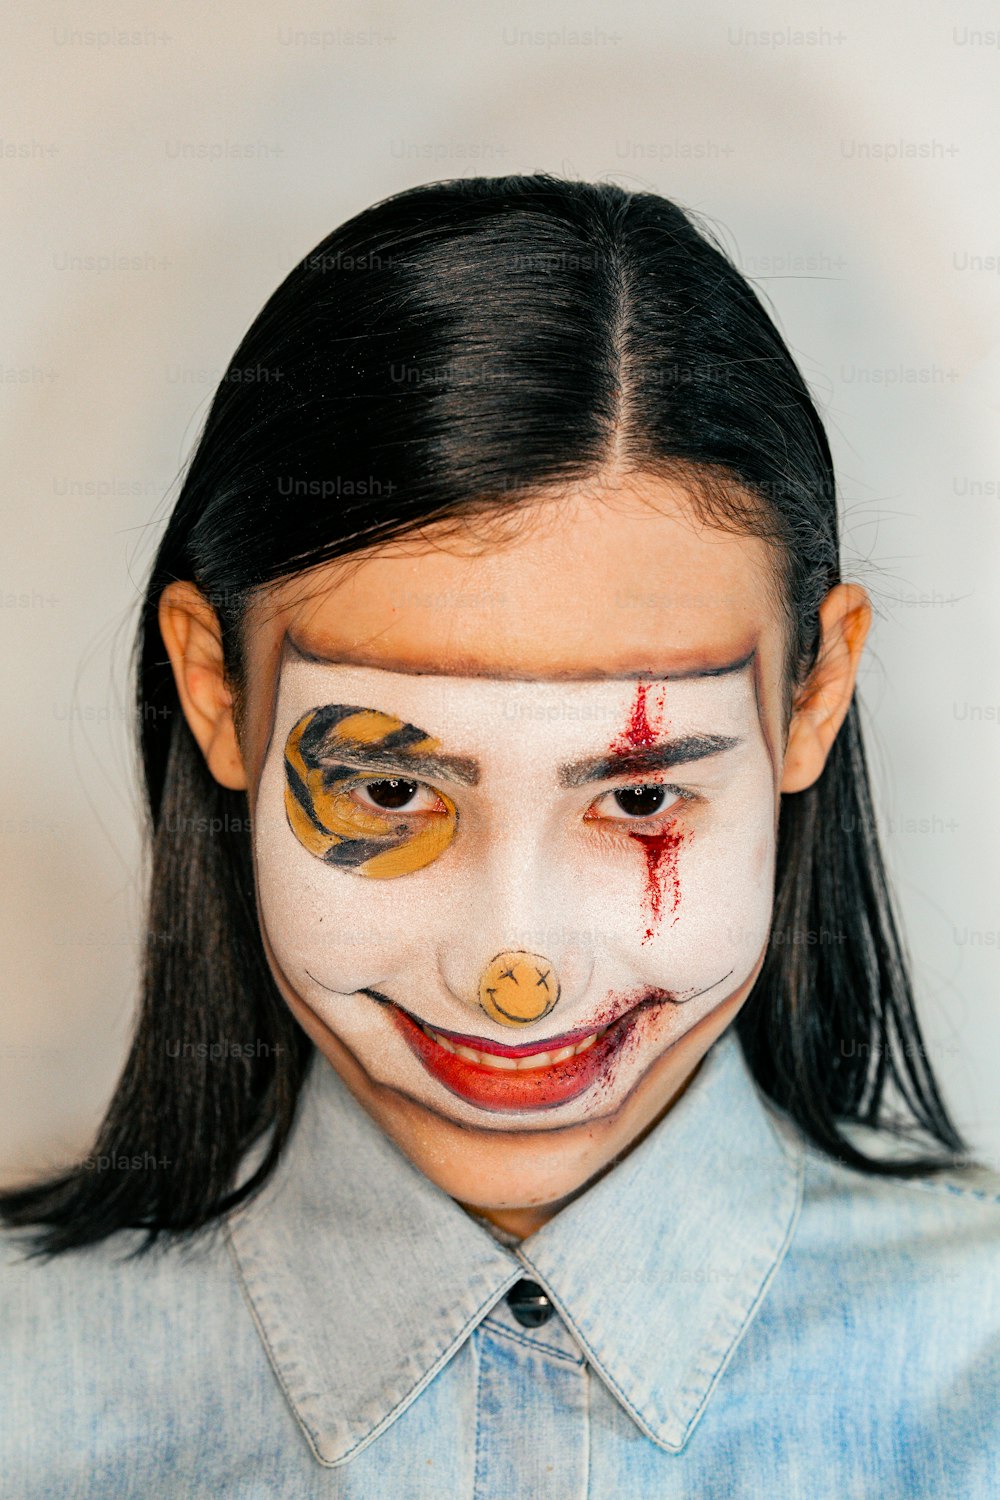 a young girl with painted face and nose